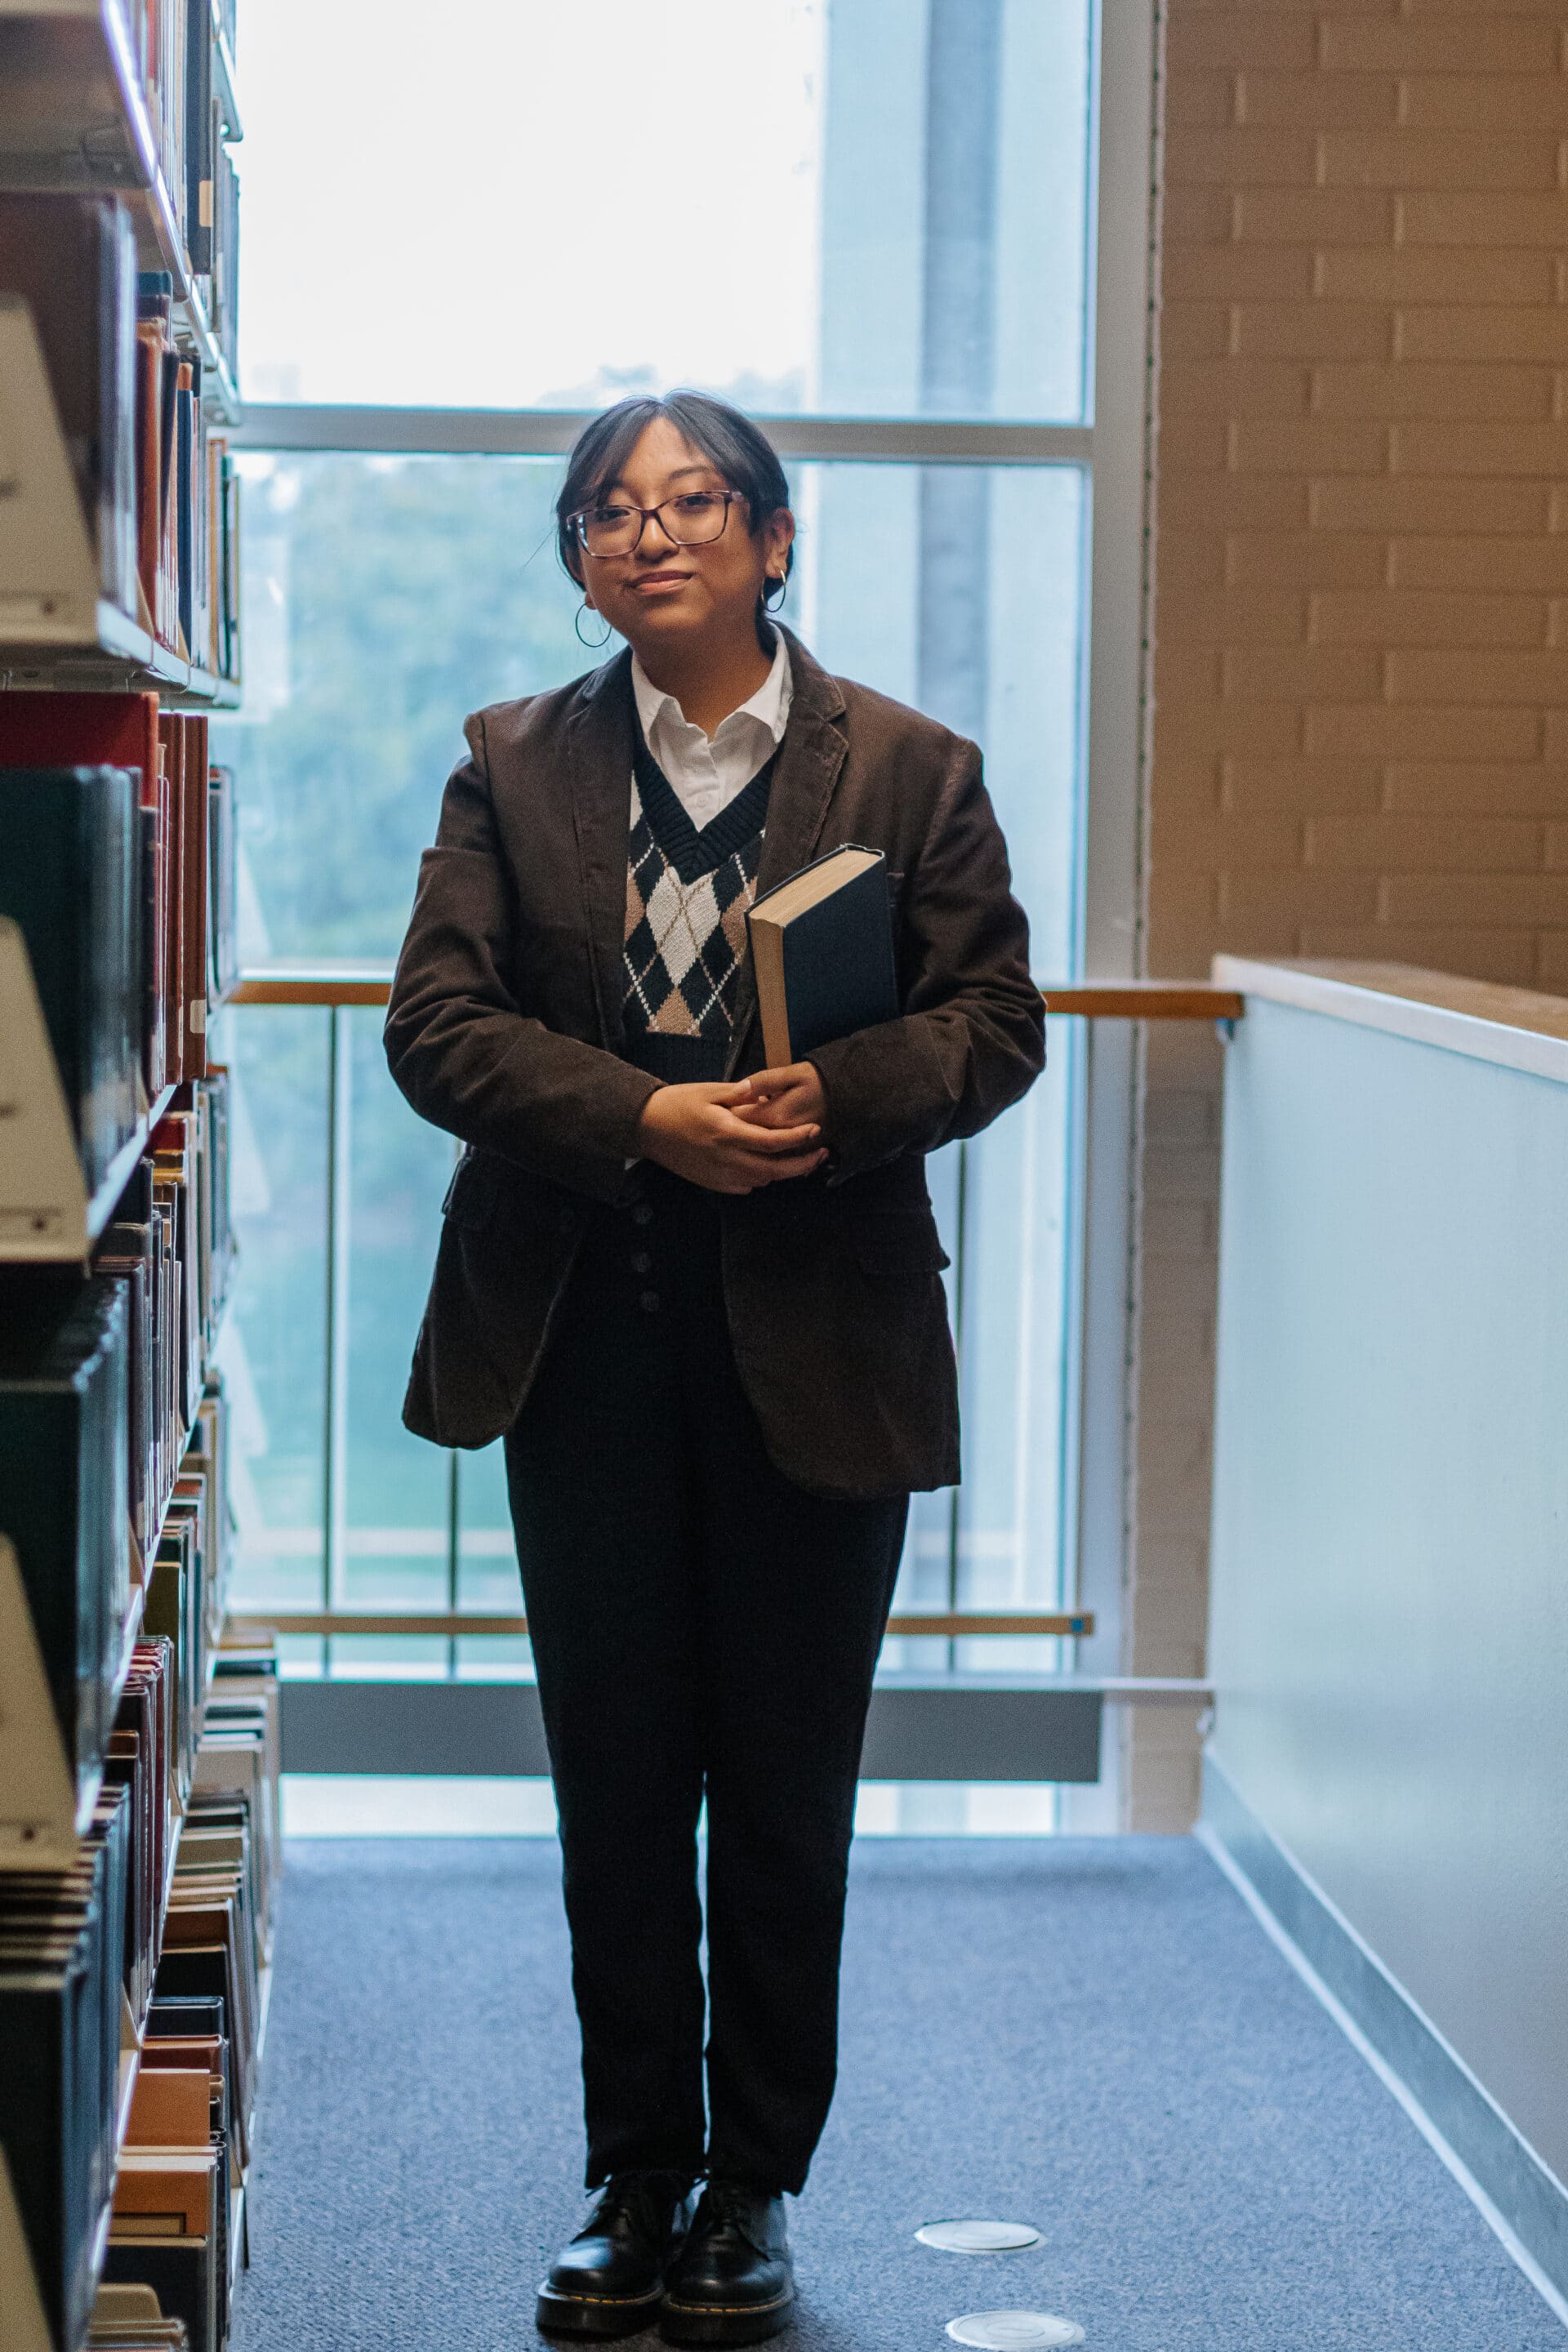 student standing in front of book stack at a library